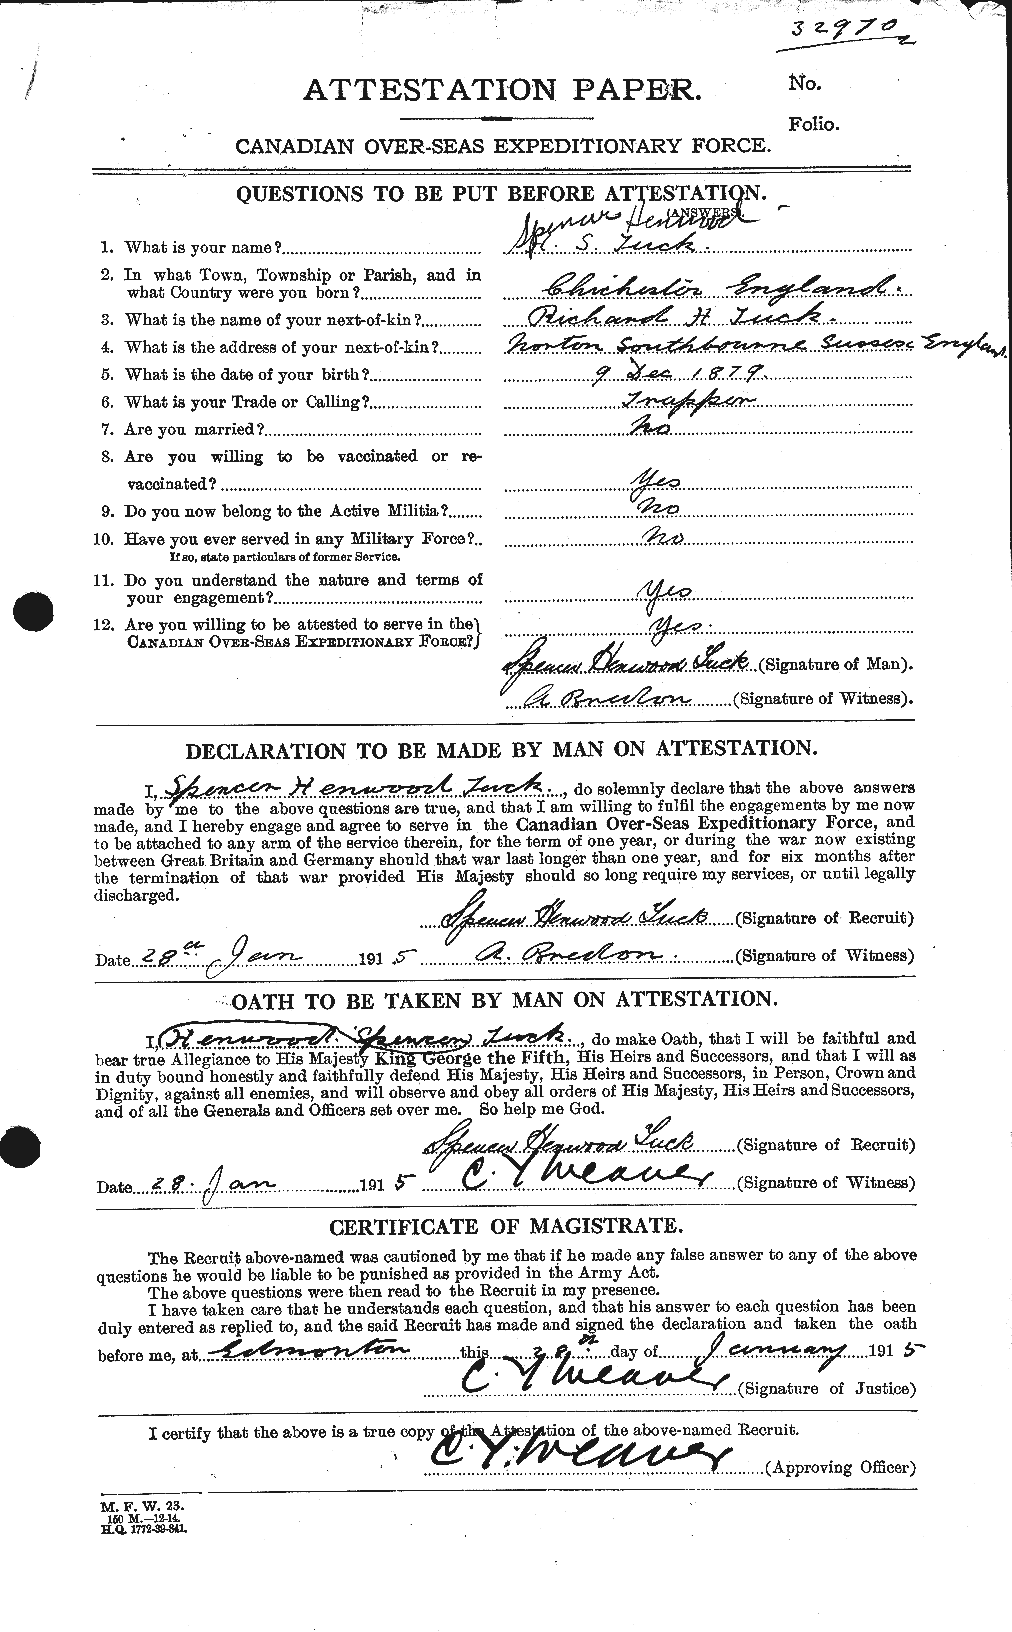 Personnel Records of the First World War - CEF 642616a